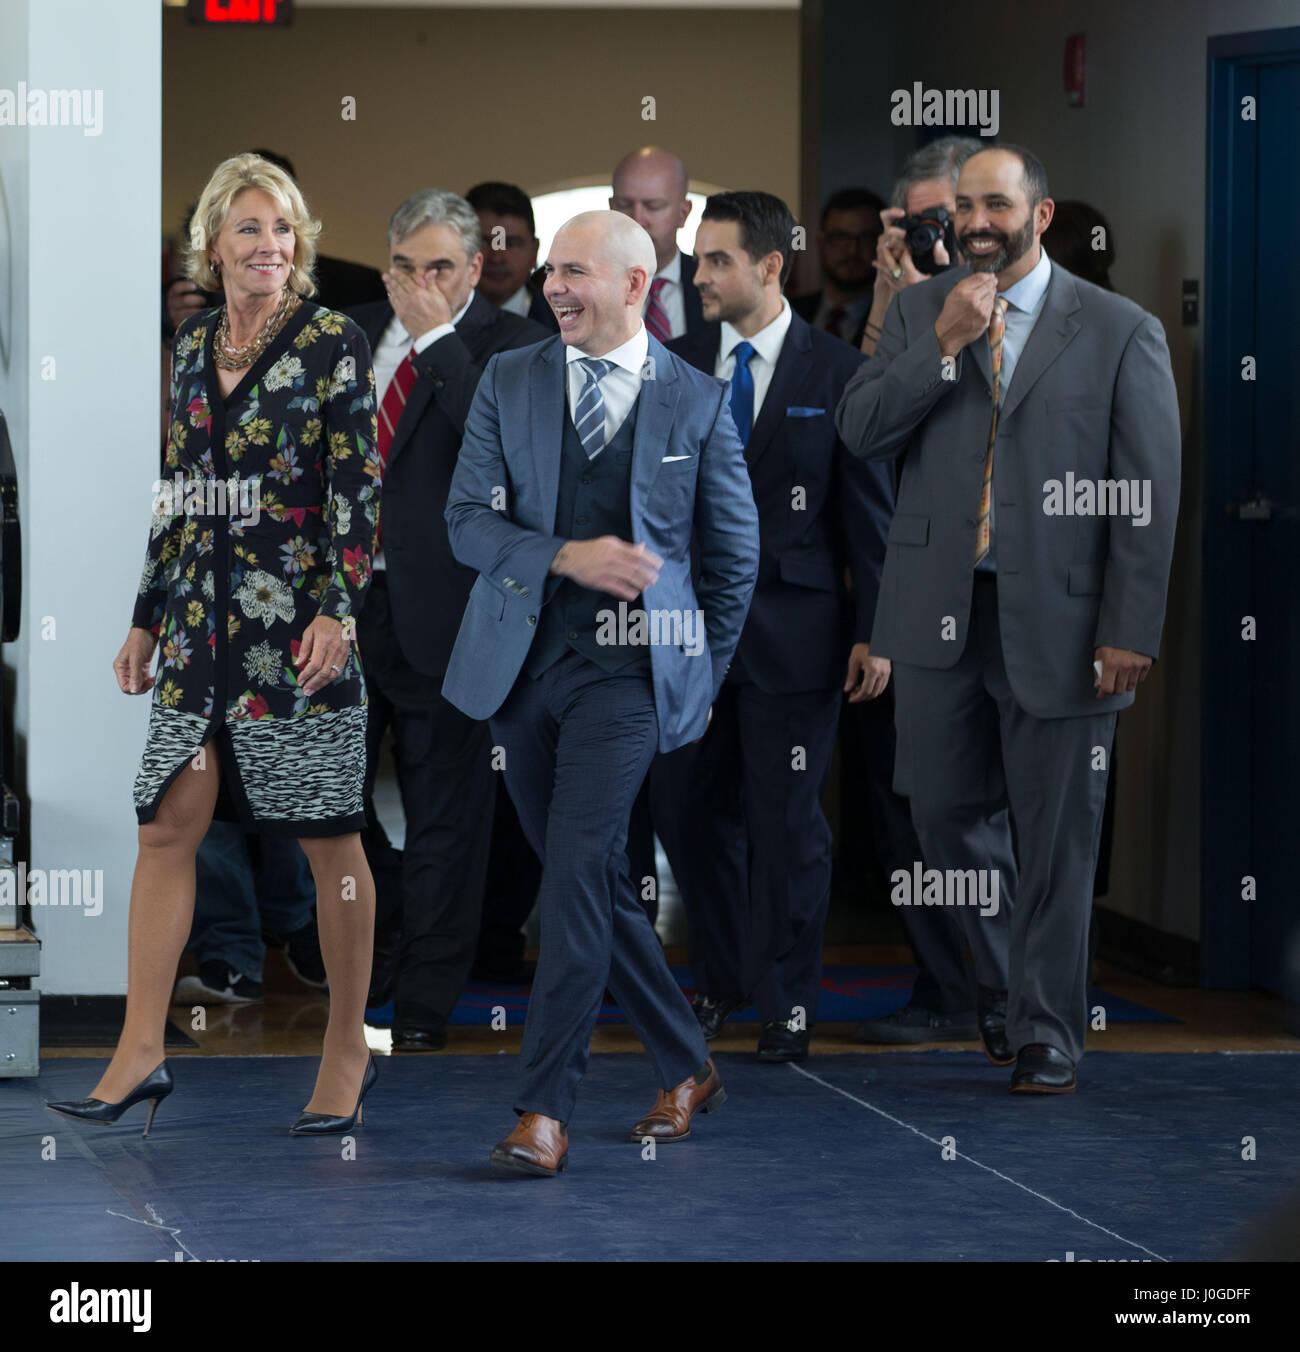 U.S. Secretary of Education Betsy DeVos, left, walks with rapper Pitbull at a charter school he supports in Little Havana during a visit to SLAM April 6, 2017 in Miami, Florida. The controversial education secretary made several stops including her first visit to a public university, a private christian school and the charter school. Stock Photo